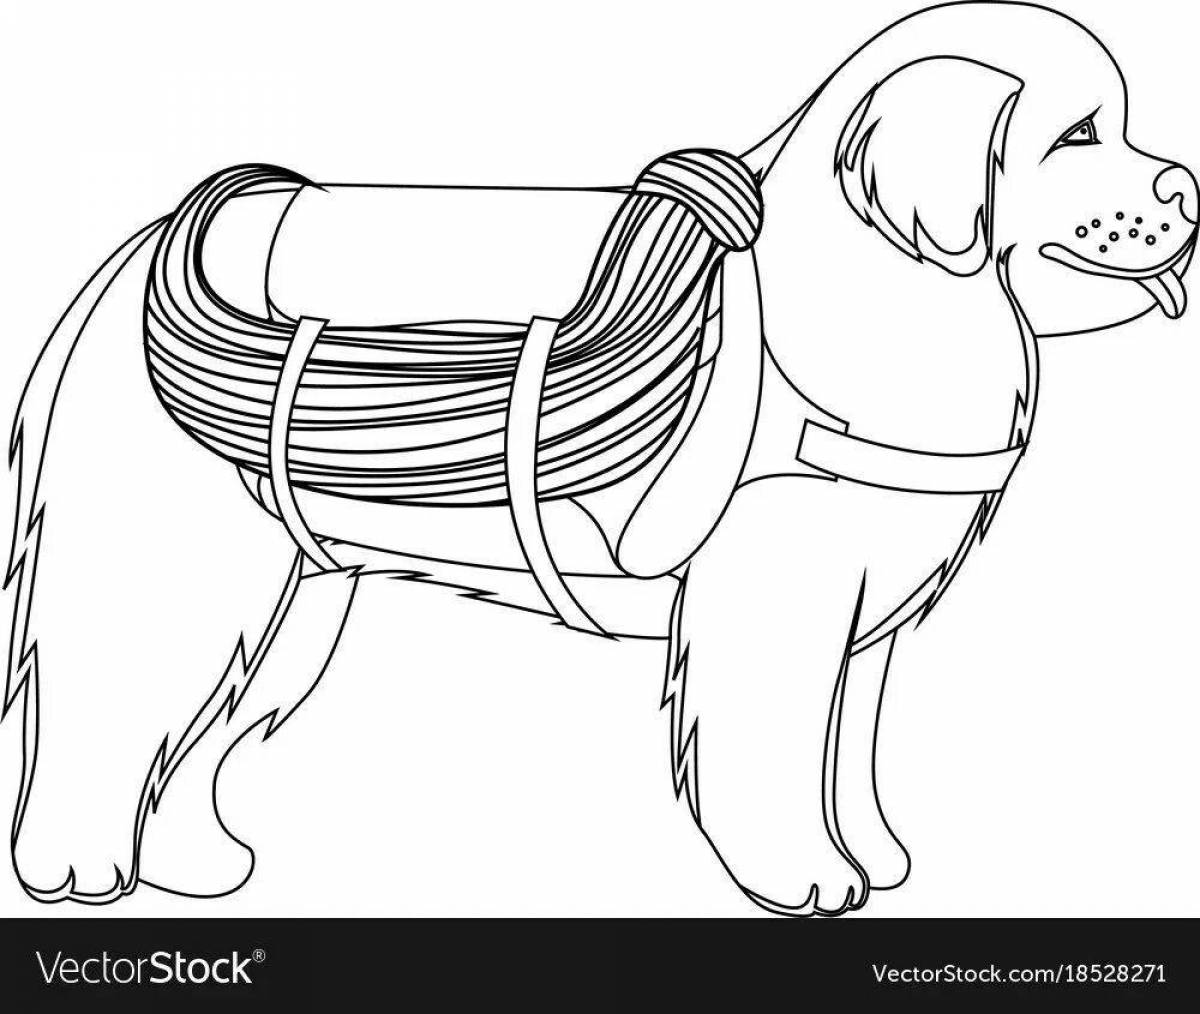 Fire dog coloring page